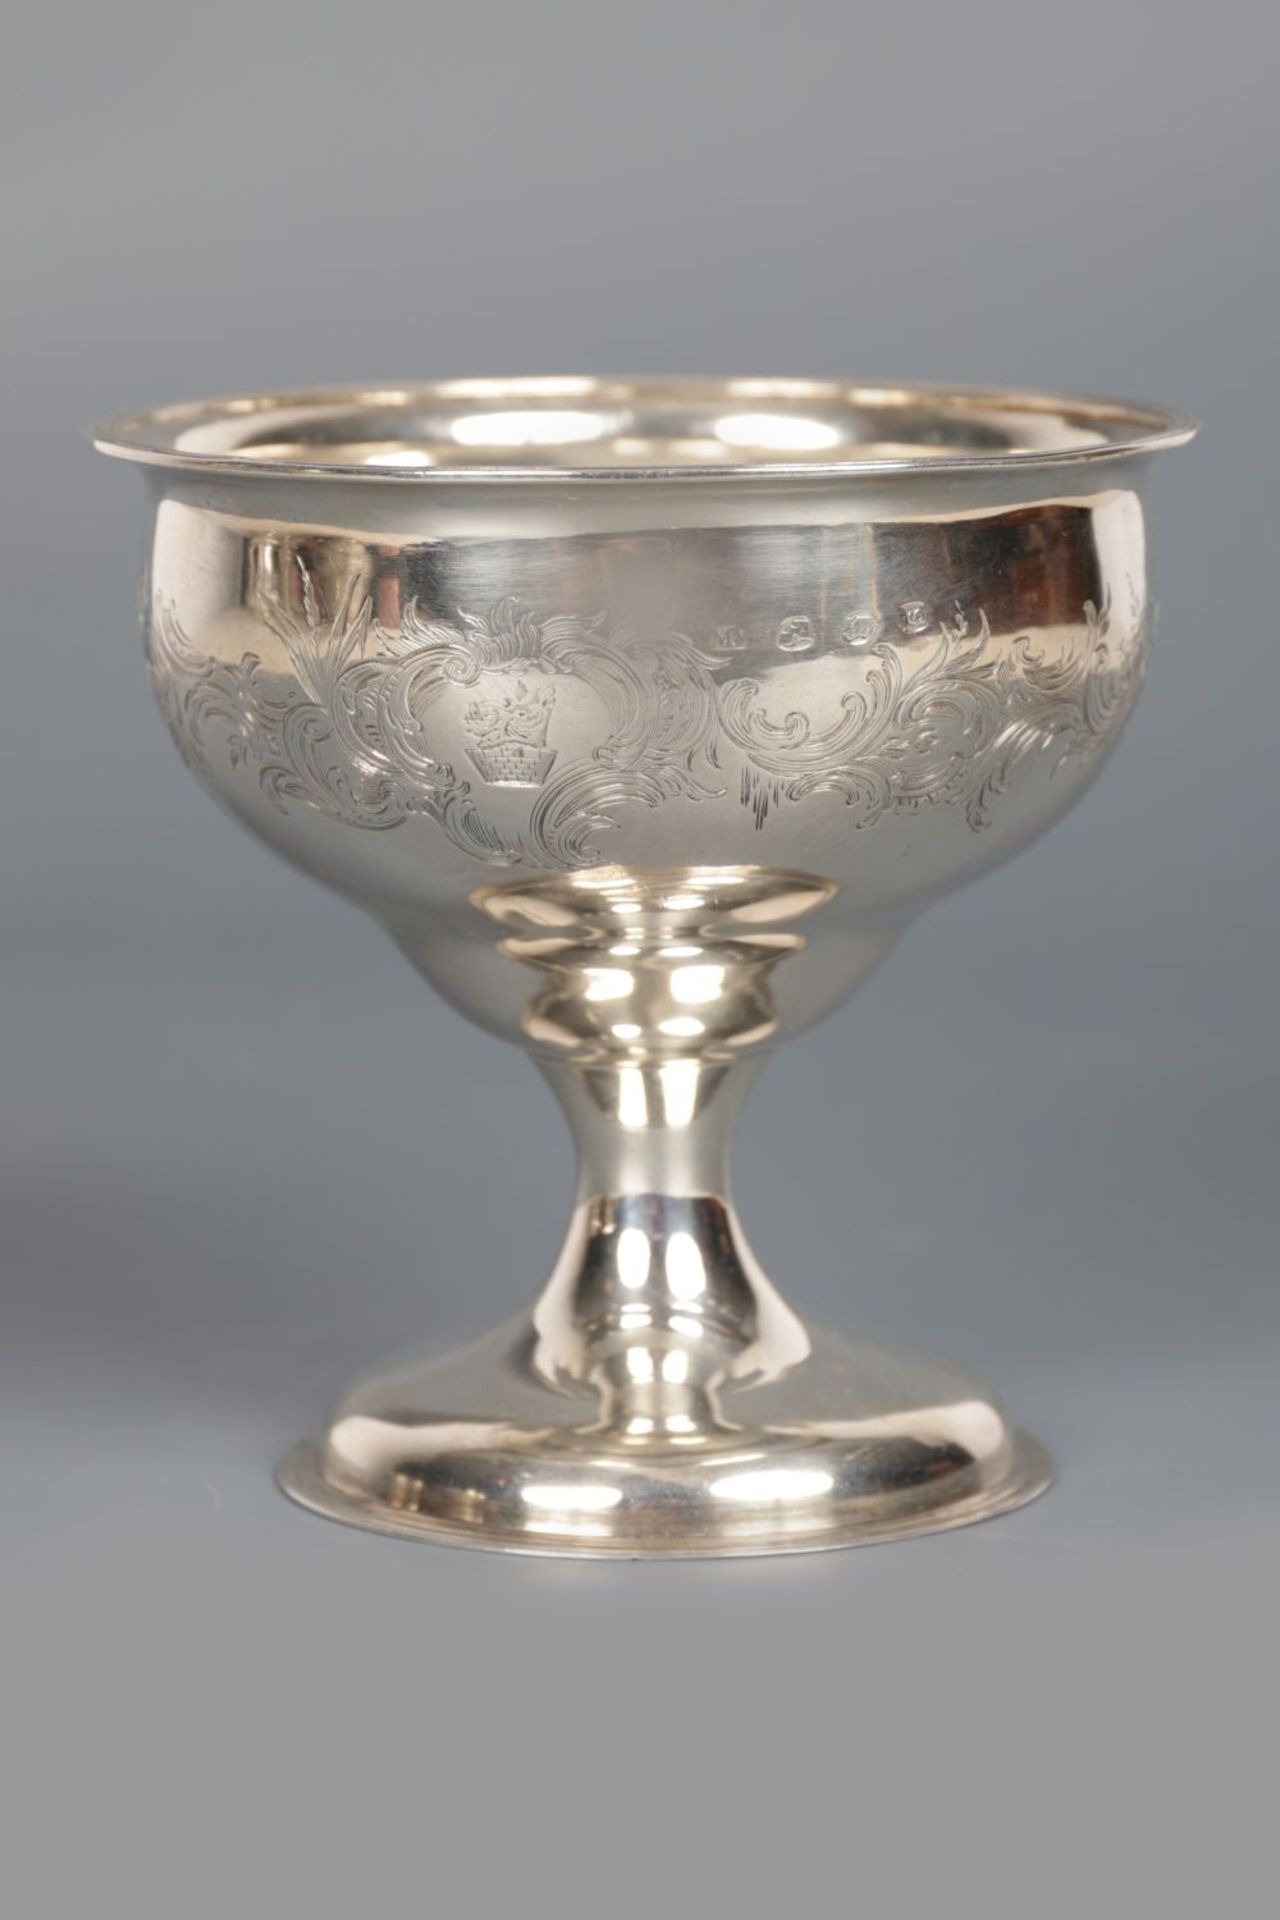 IRISH CRESTED SILVER SWEET MEAT BOWL